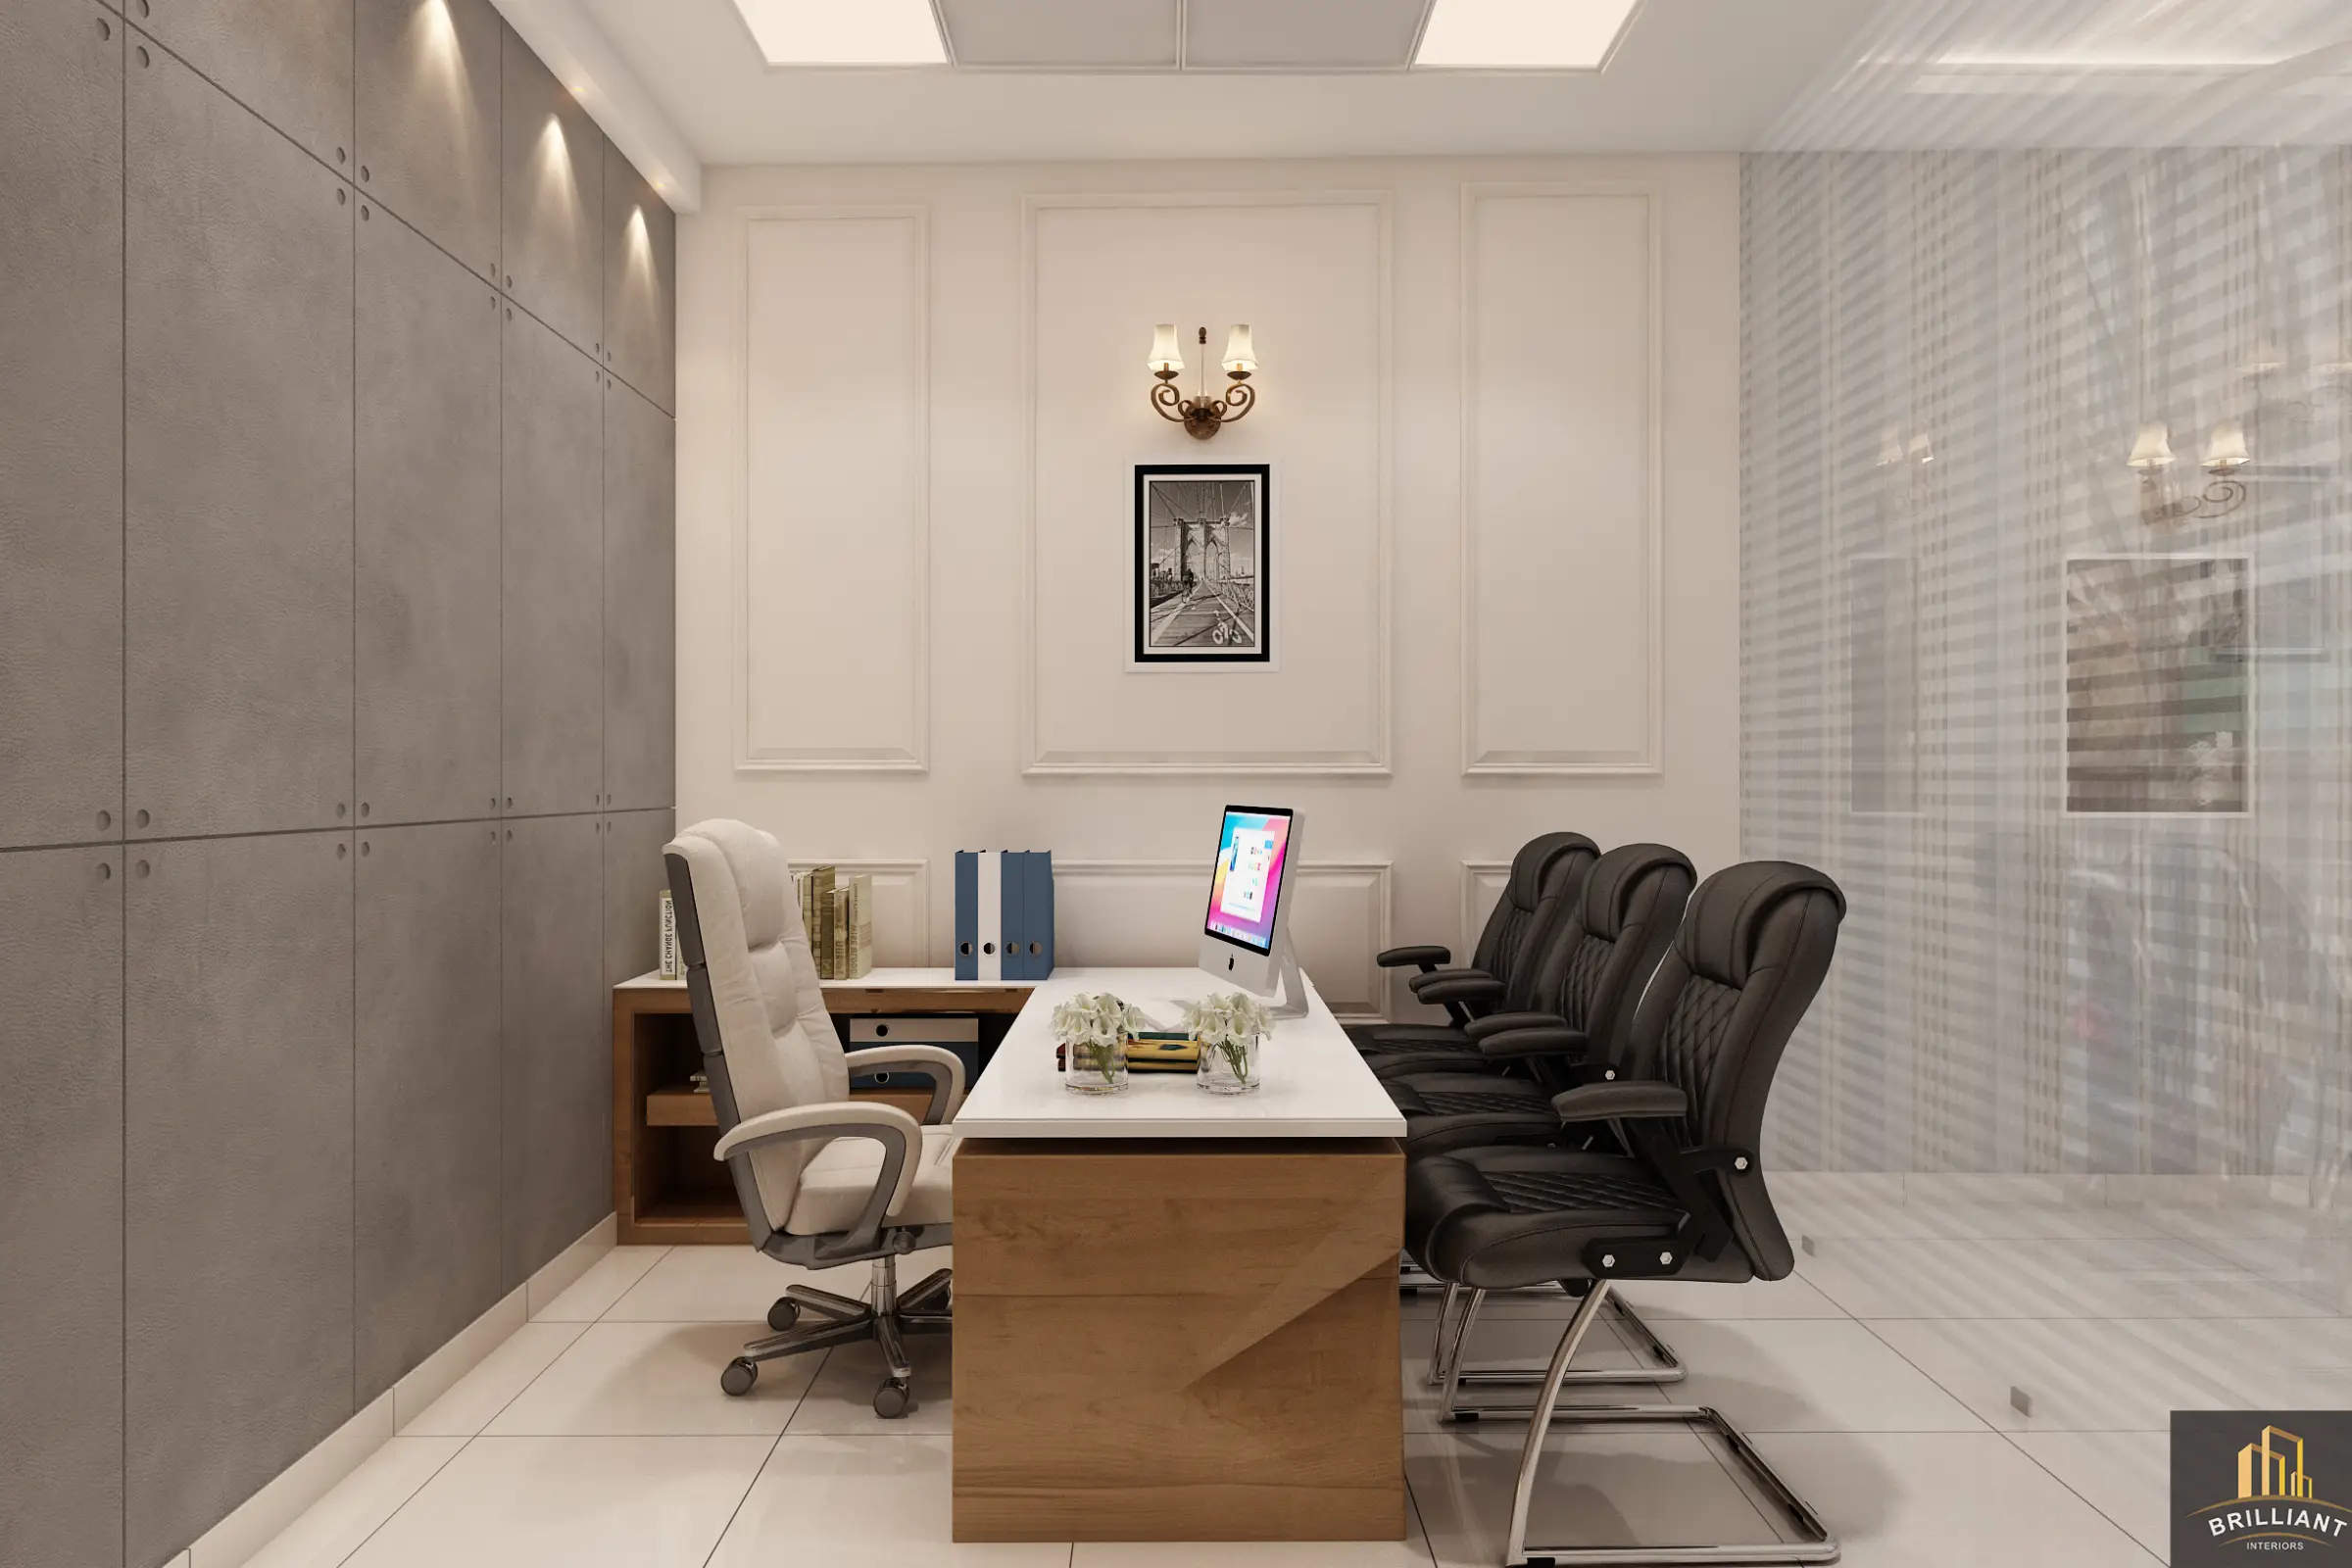 Attractive office interior with light-colored walls and stylish office chairs